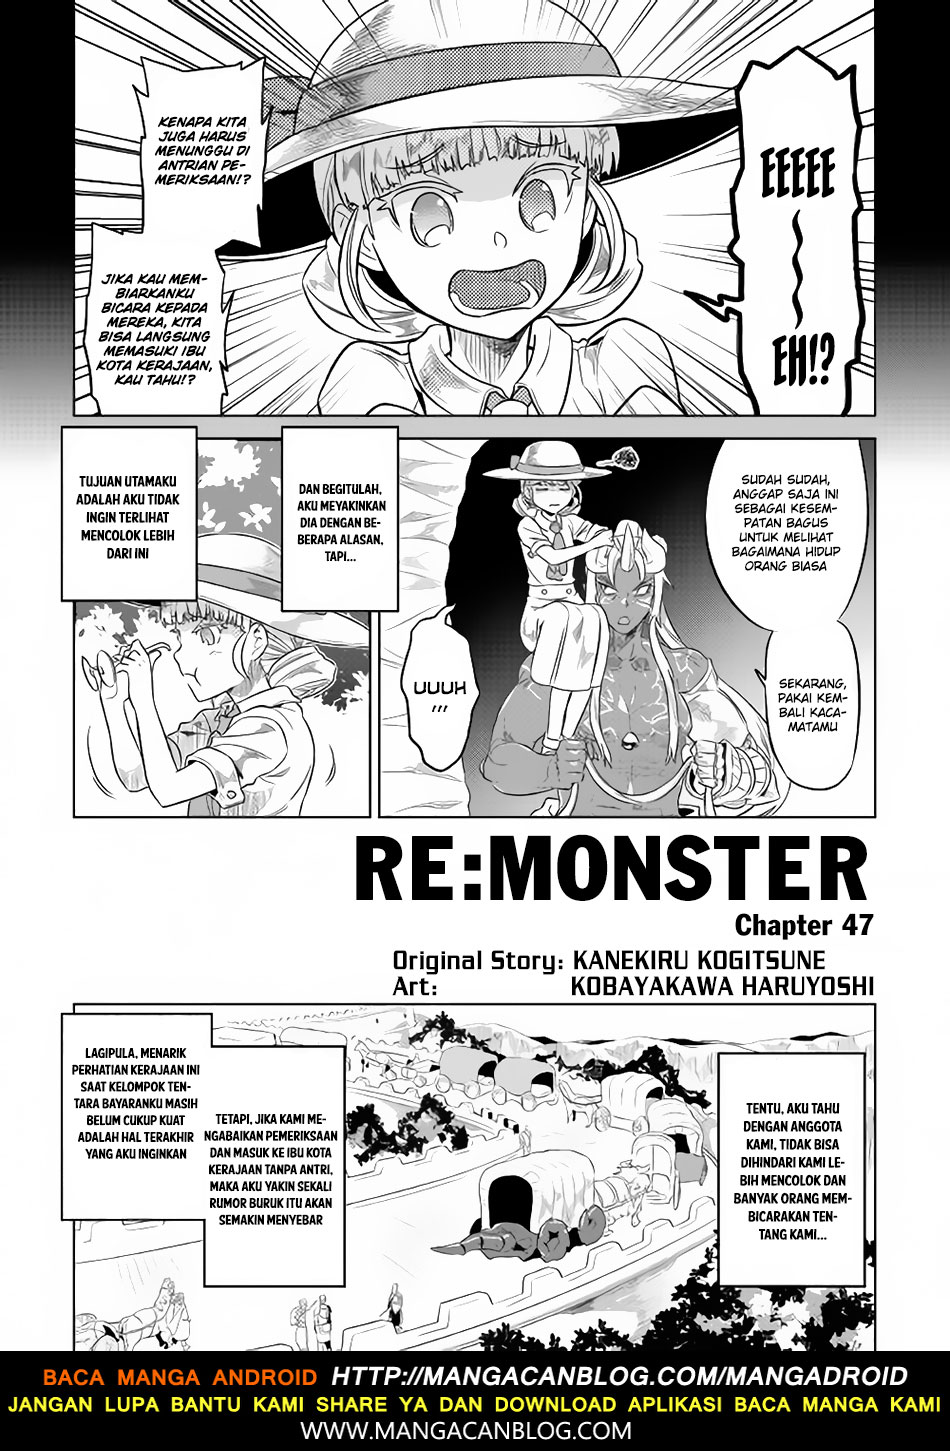 Re:Monster: Chapter 47 - Page 1